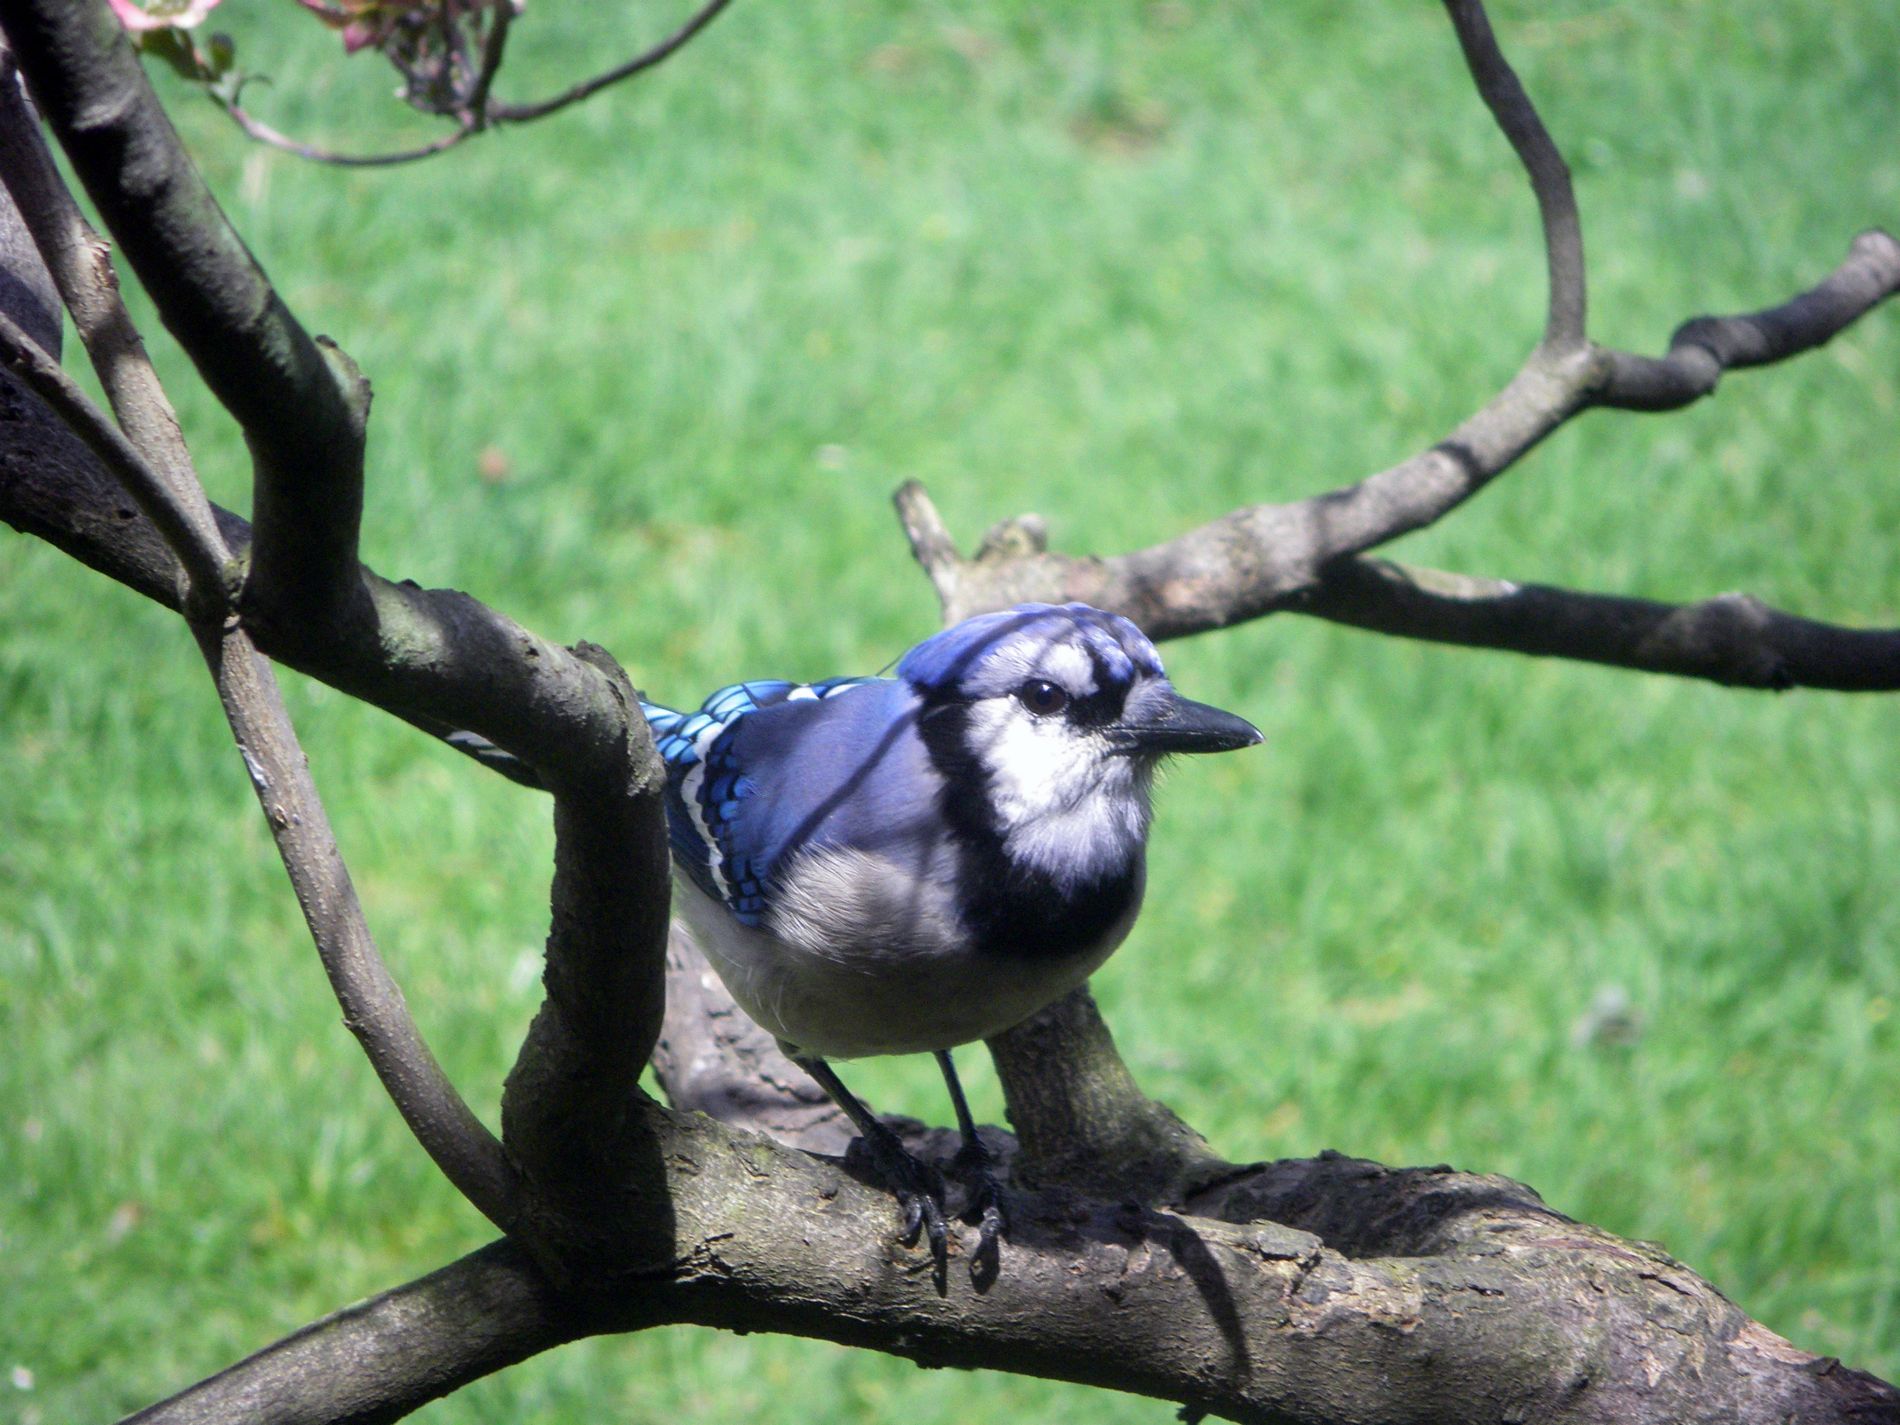 Blue Jay notices movement in the window... say cheese!